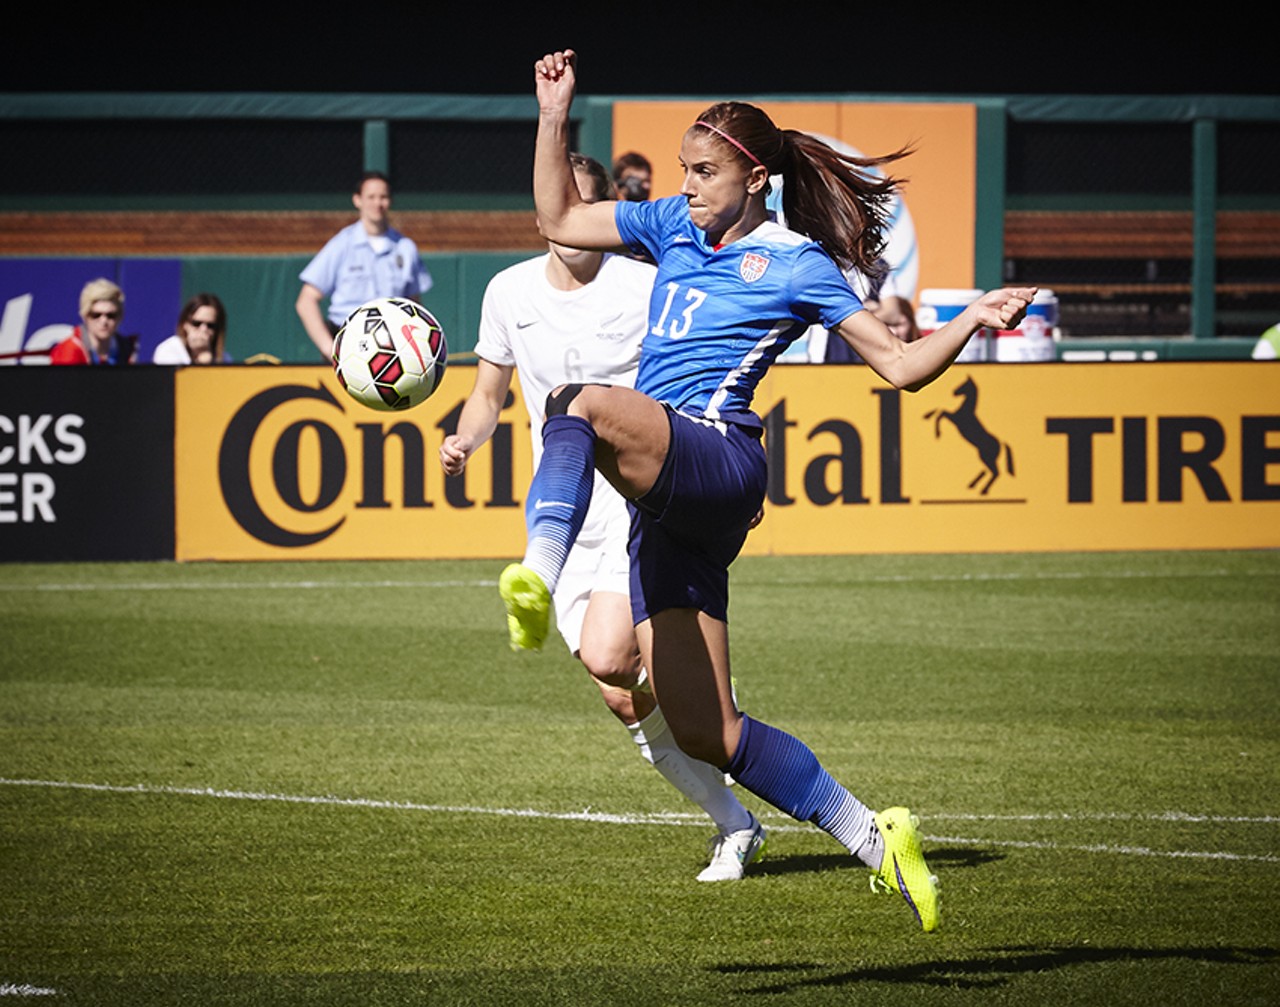 Alex Morgan volleys the ball for a shot on goal.